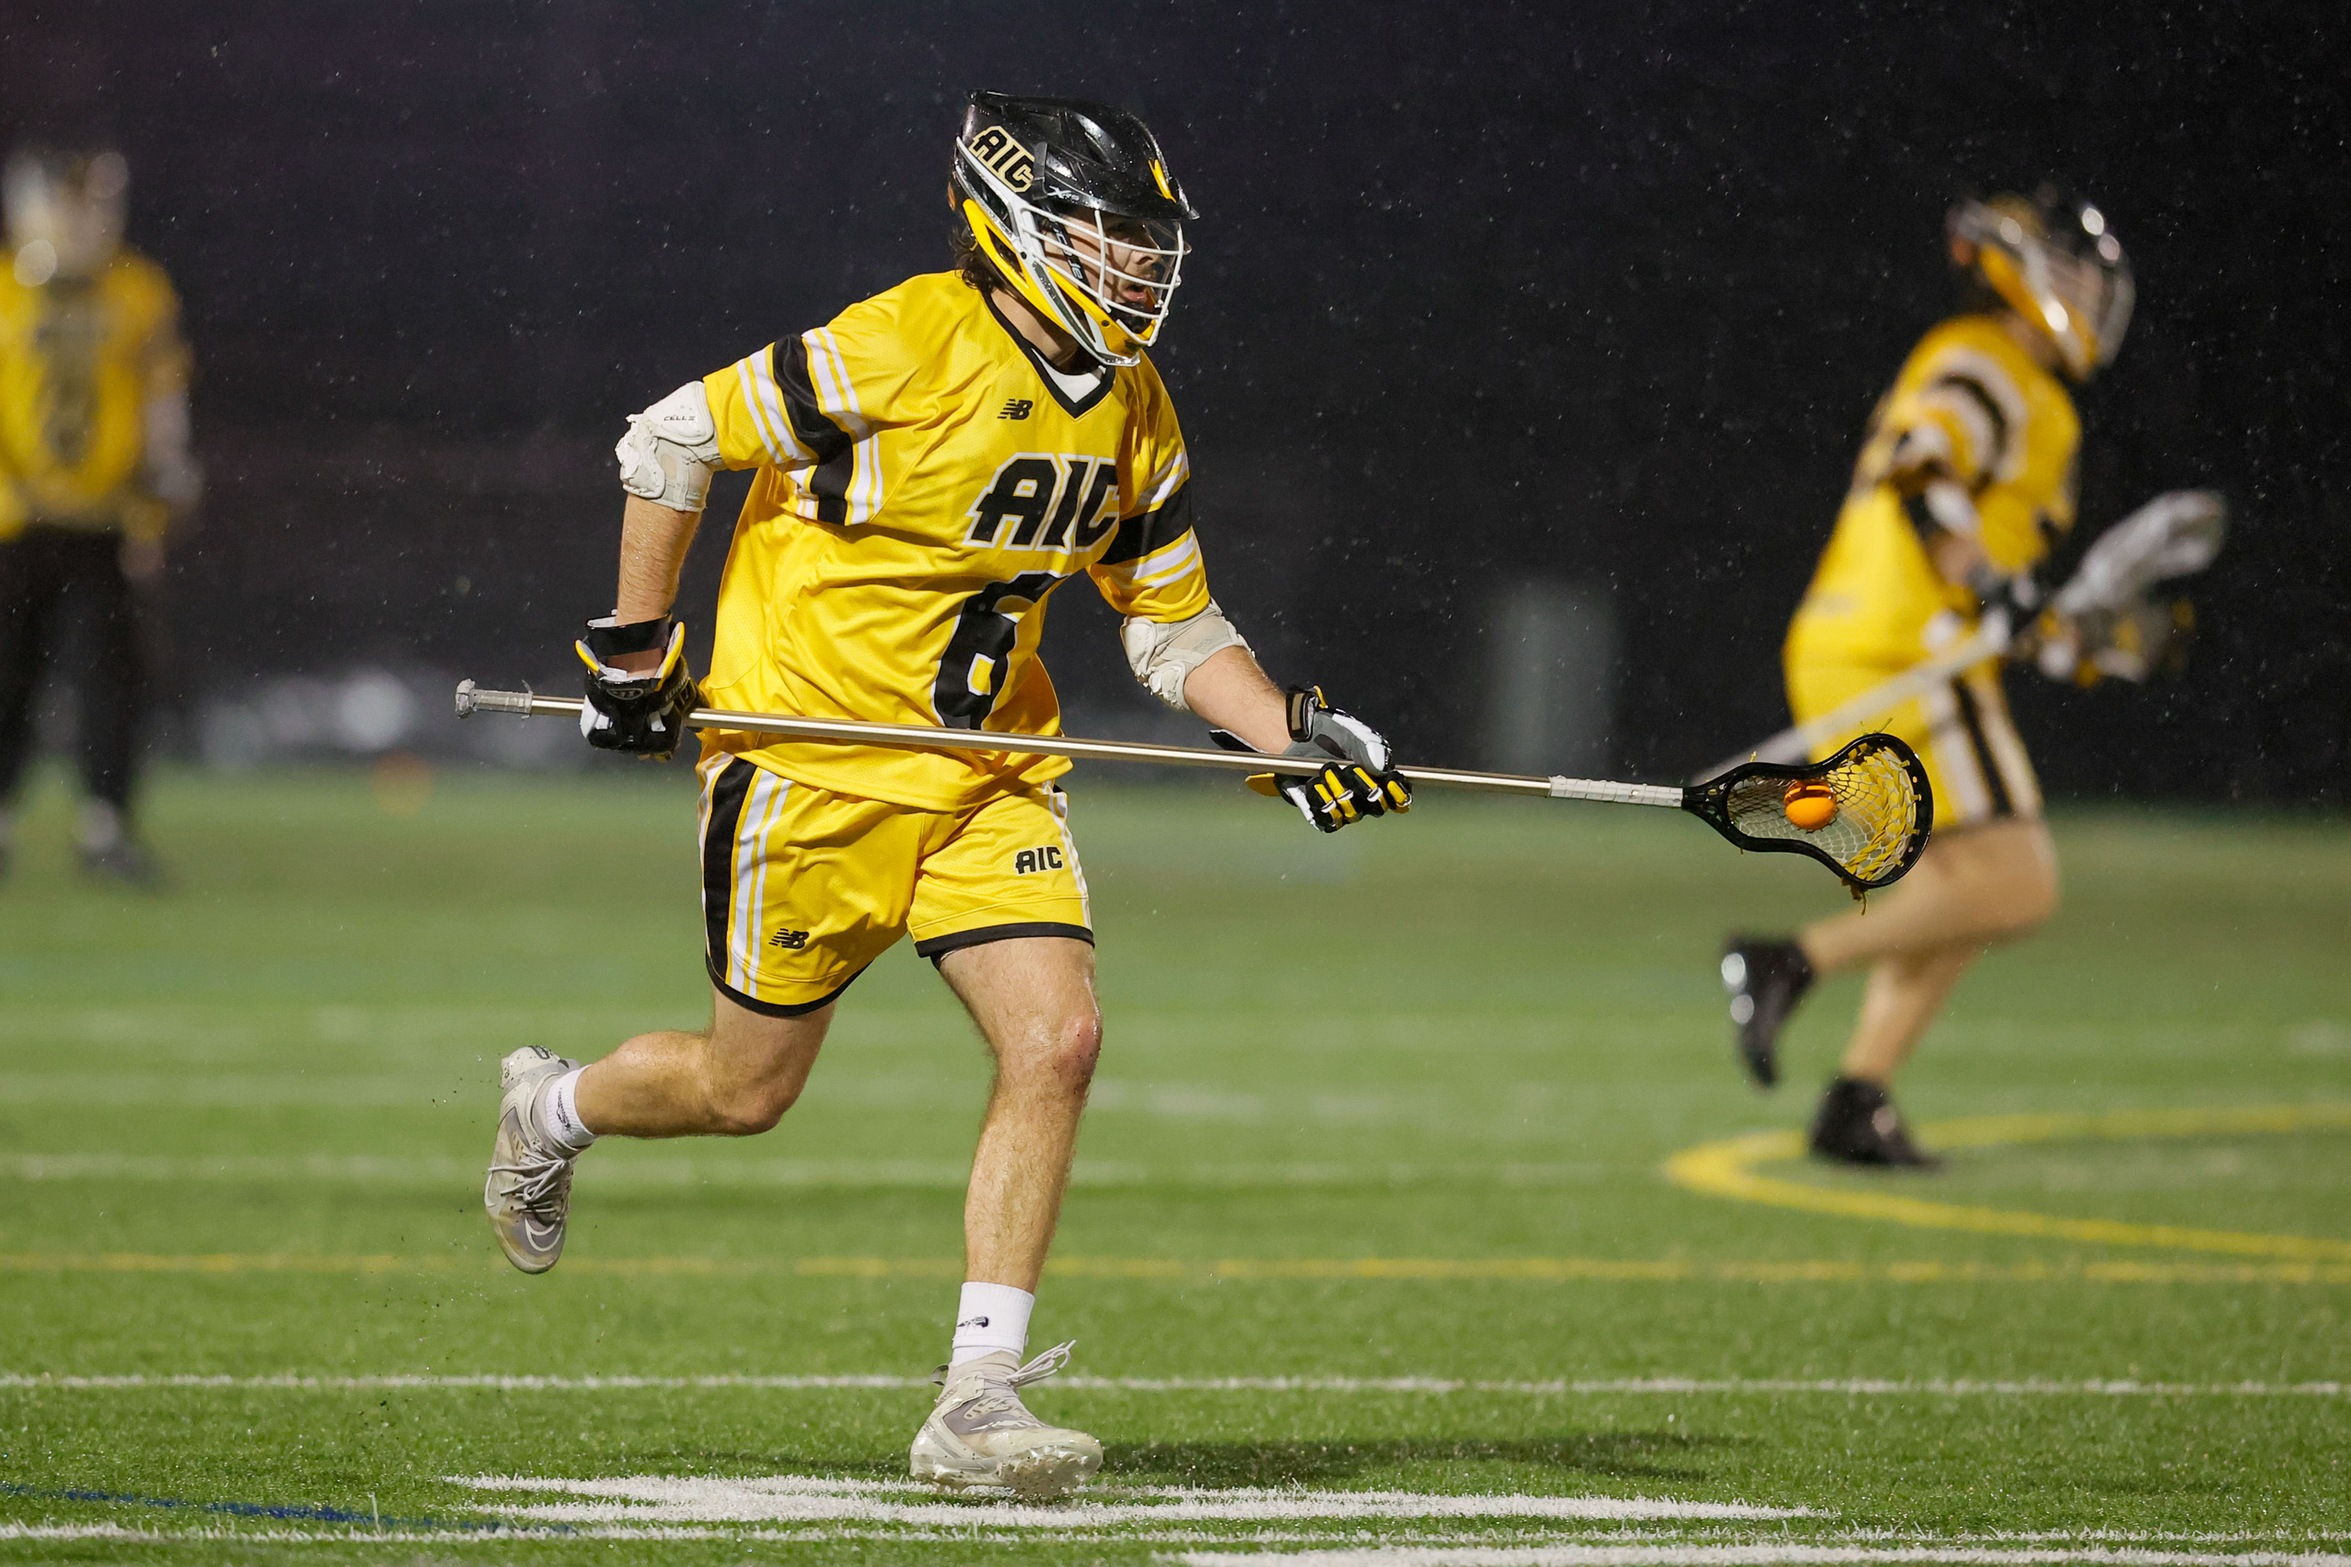 Goode, Bamford have huge games to lead Men's Lacrosse past D'Youville